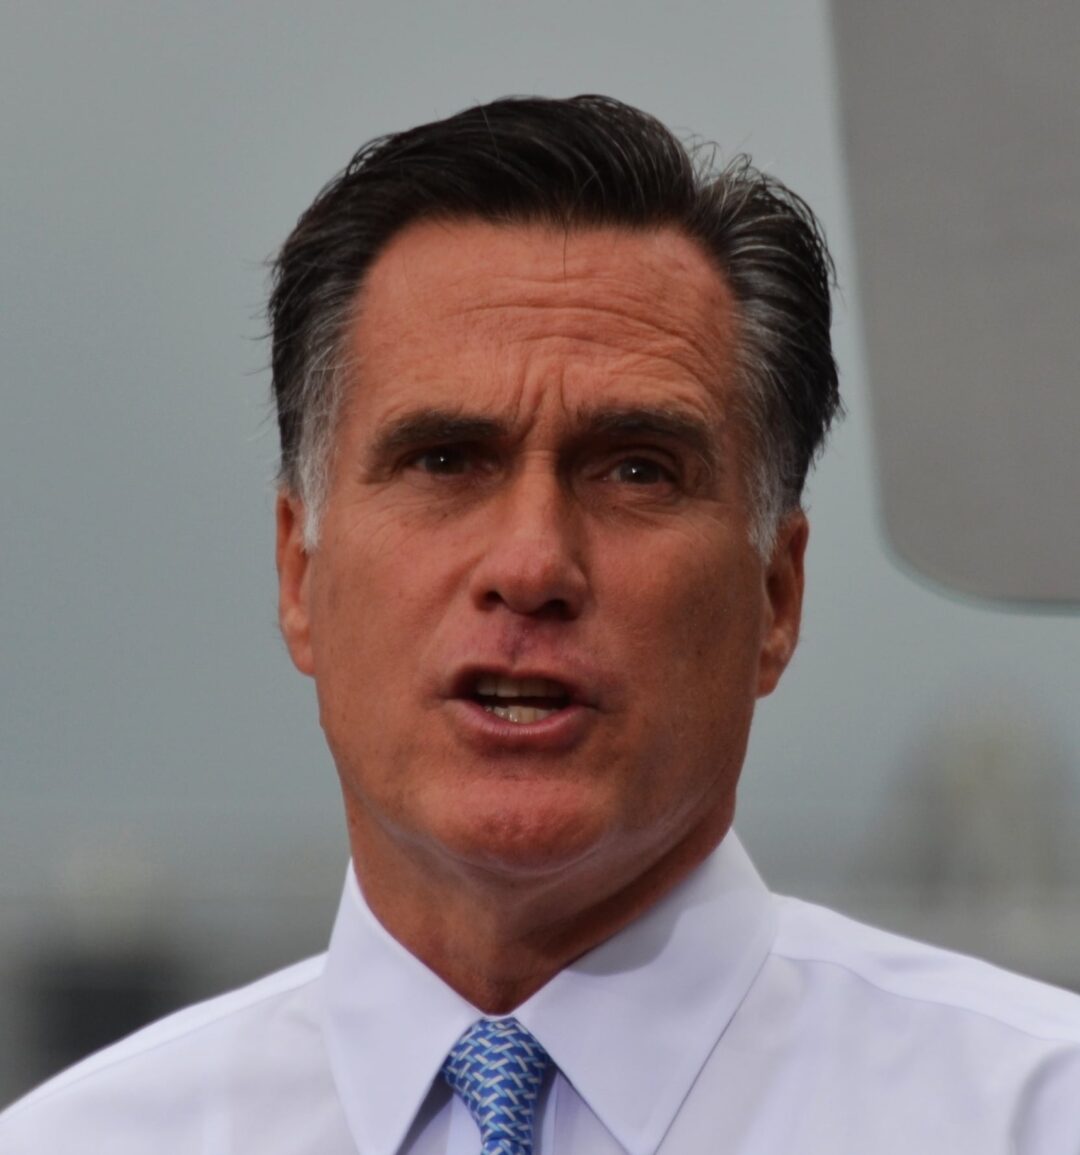 Sorry? Mitt Romney approved that message?